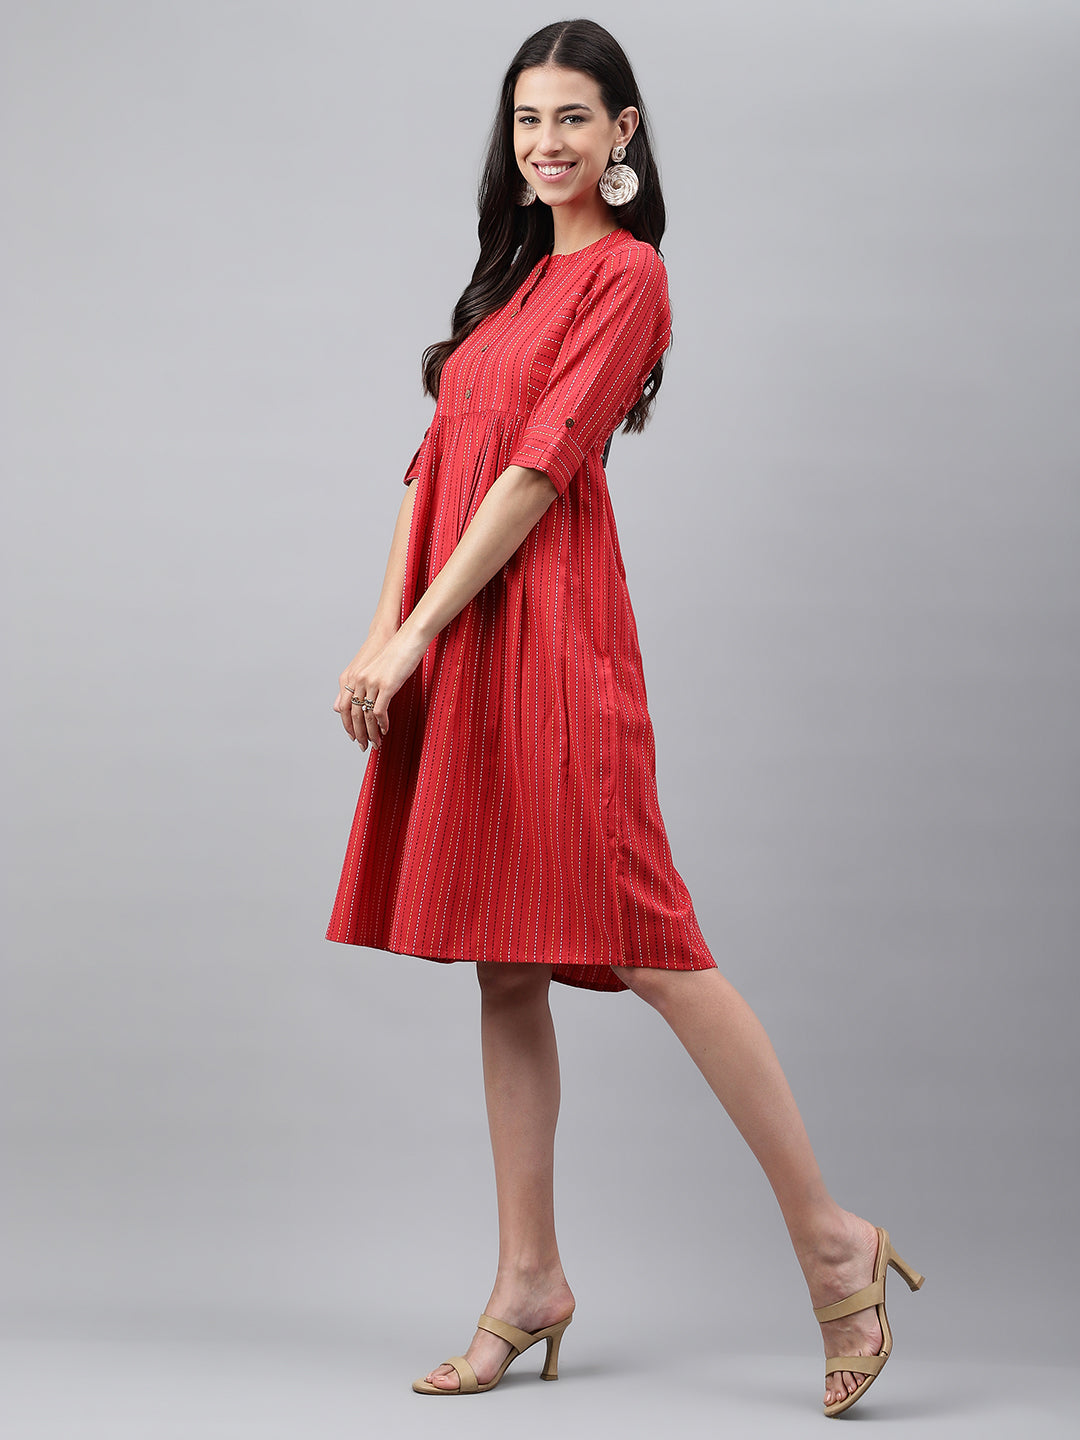 Women Red Cotton Flared Casual Casual Dress